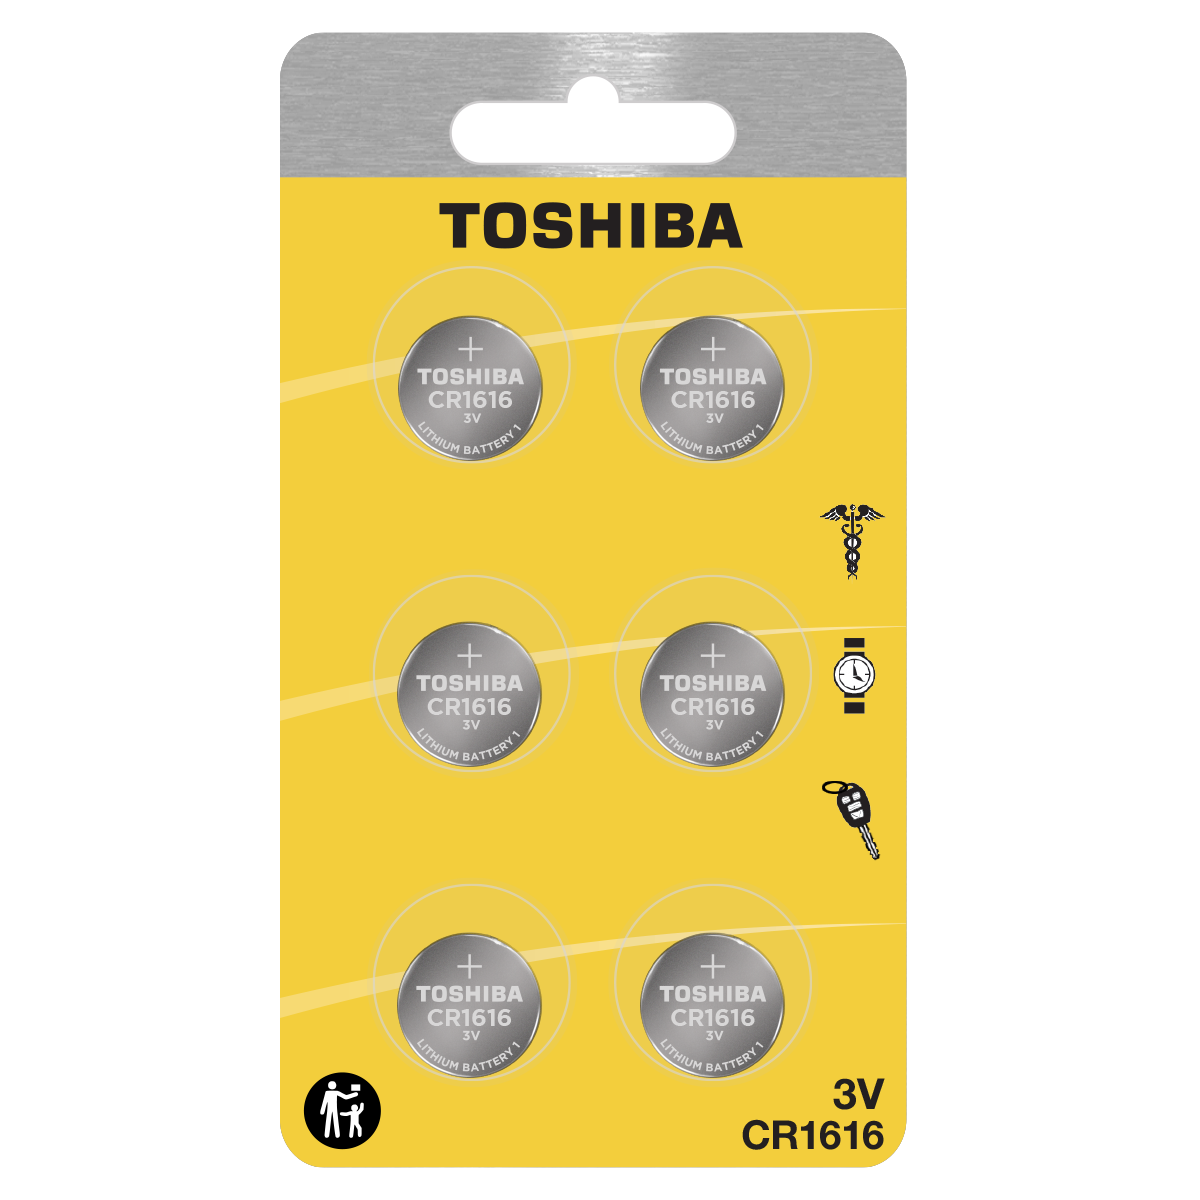 Toshiba CR1616 Battery 3V Lithium Coin Cell (6 PCS Child Resistant Blister Package) 